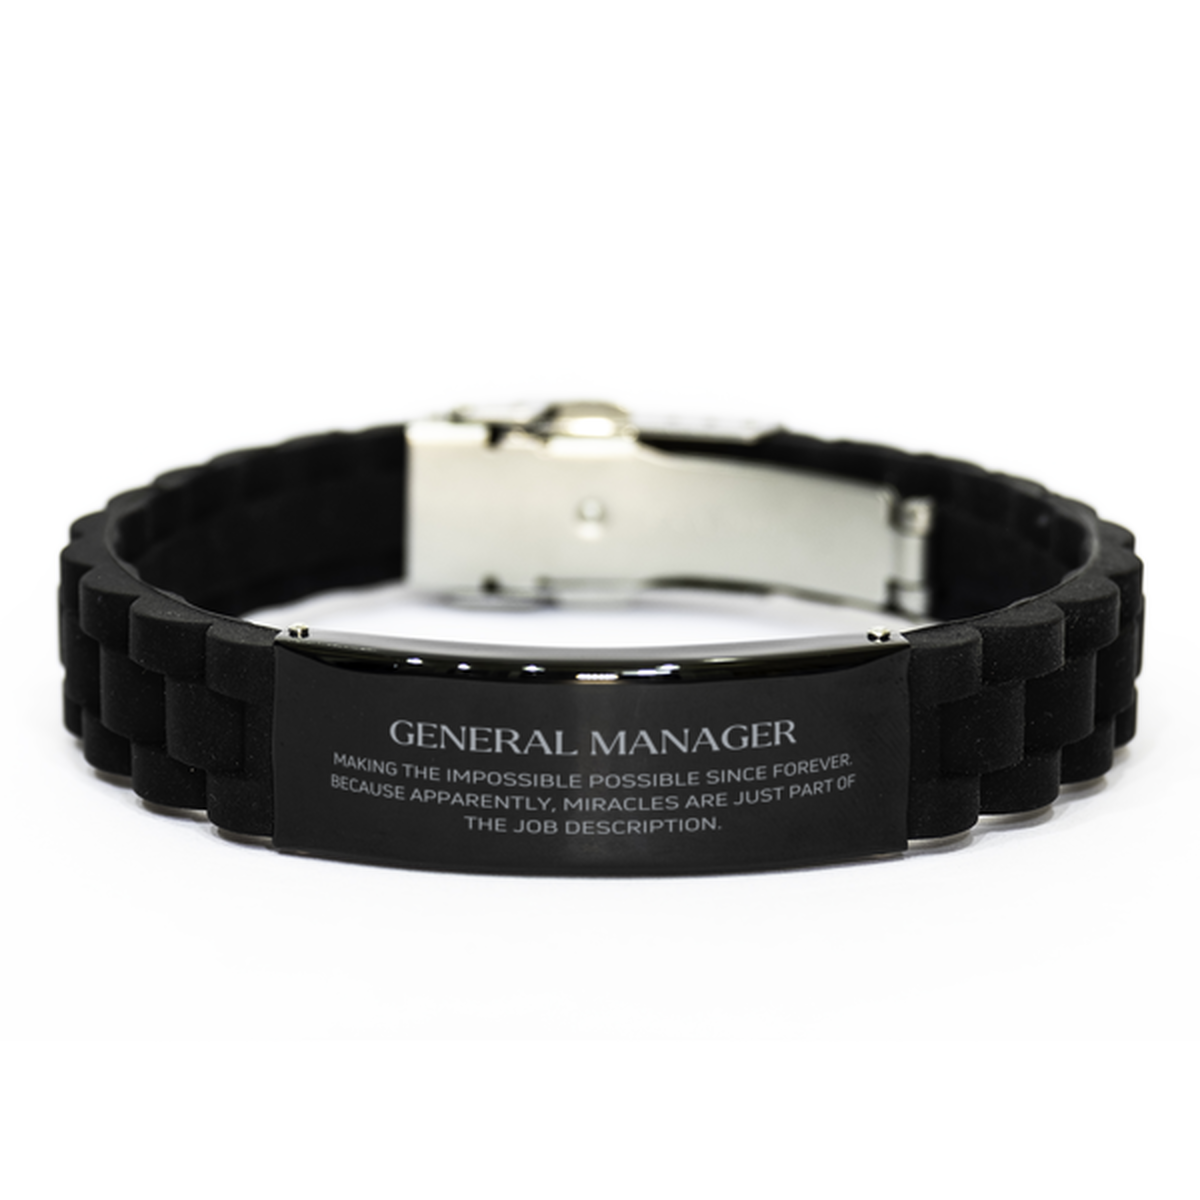 Funny General Manager Gifts, Miracles are just part of the job description, Inspirational Birthday Black Glidelock Clasp Bracelet For General Manager, Men, Women, Coworkers, Friends, Boss